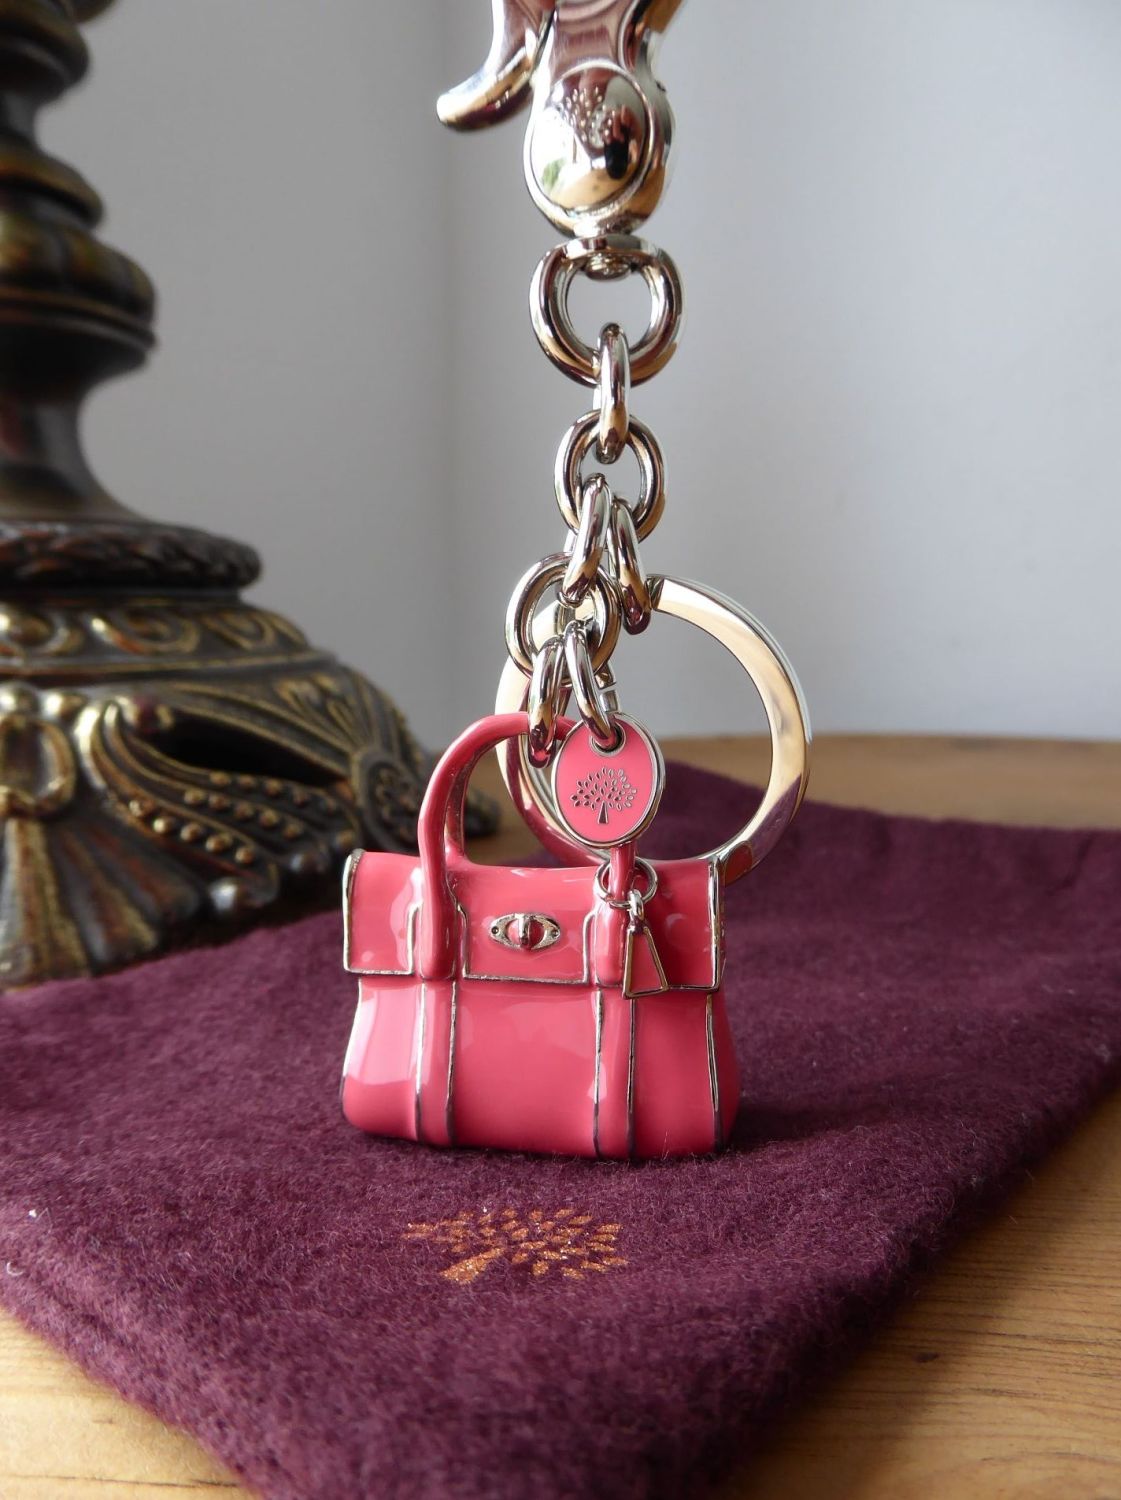 Mulberry Mini Bayswater Keyring Bag Charm in Lipstick Pink Enamel with Silv